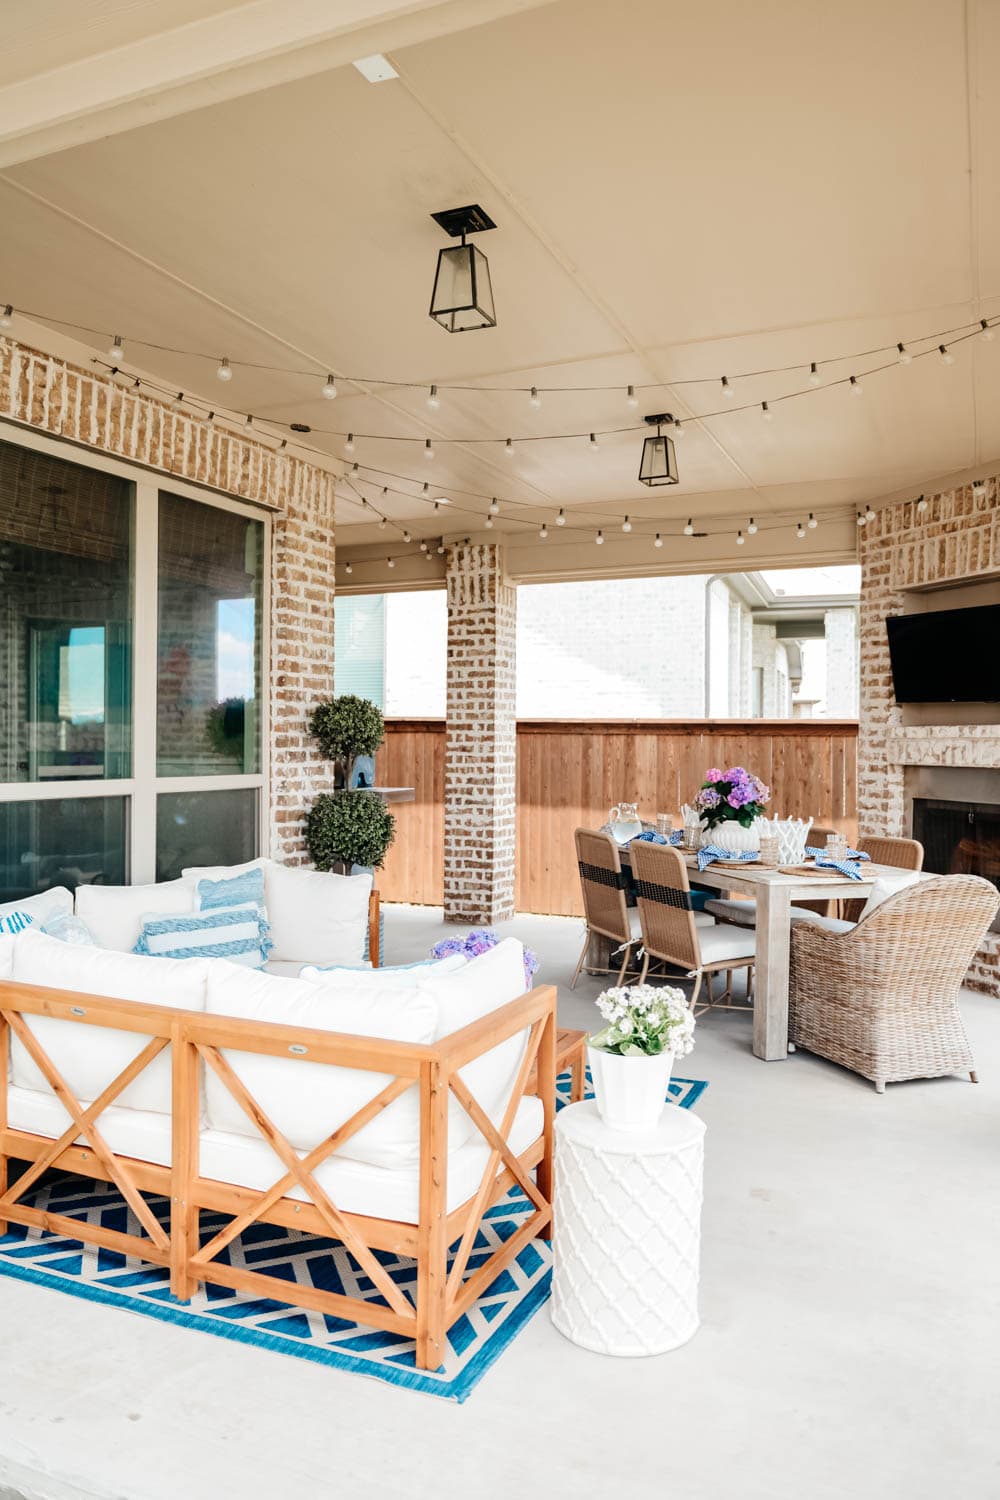 Summer patio sectional, outdoor table, outdoor television, outdoor seating ideas. #ABlissfulNest #summerpatio #patiodecor